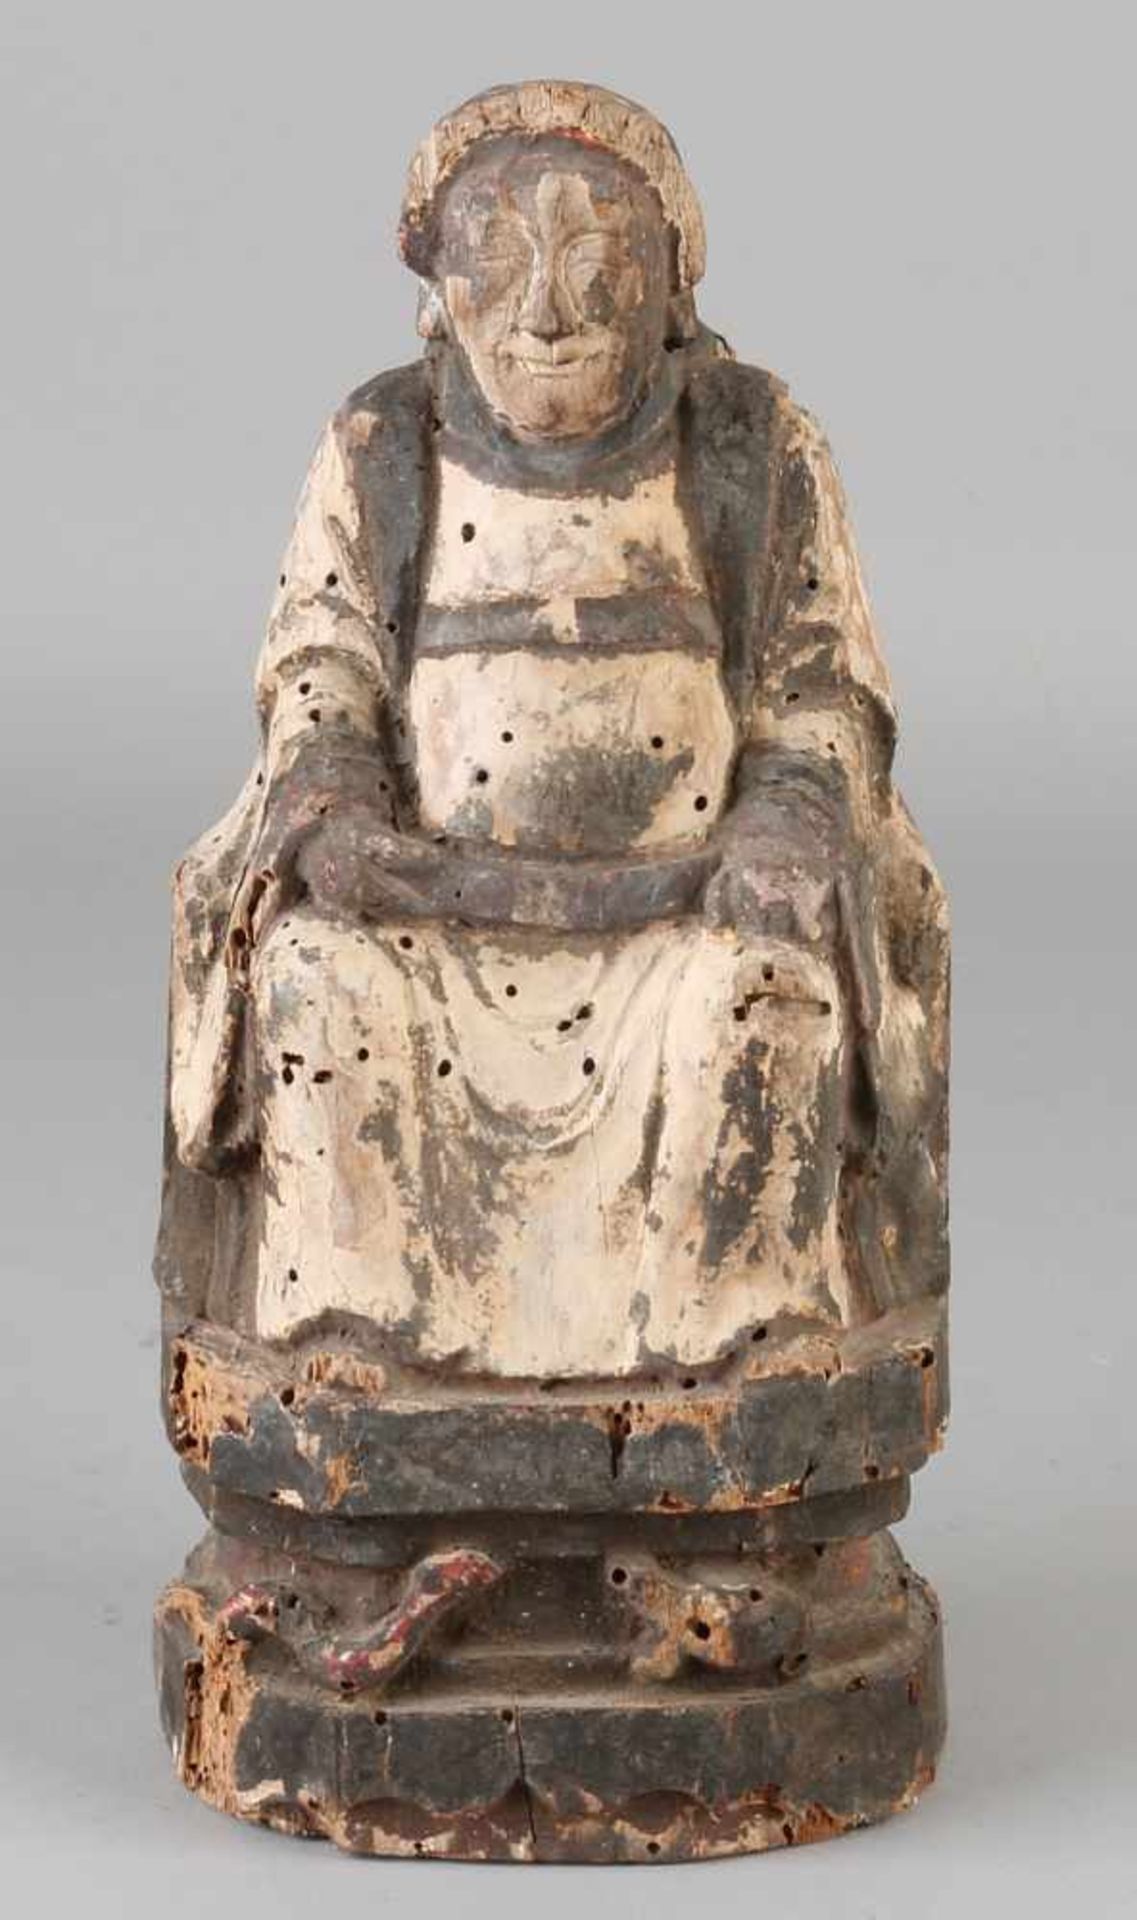 Ancient China wood inserted gepolychomeerd Fig. Buddha on pedestal with hose and turtle. 18th - 19th